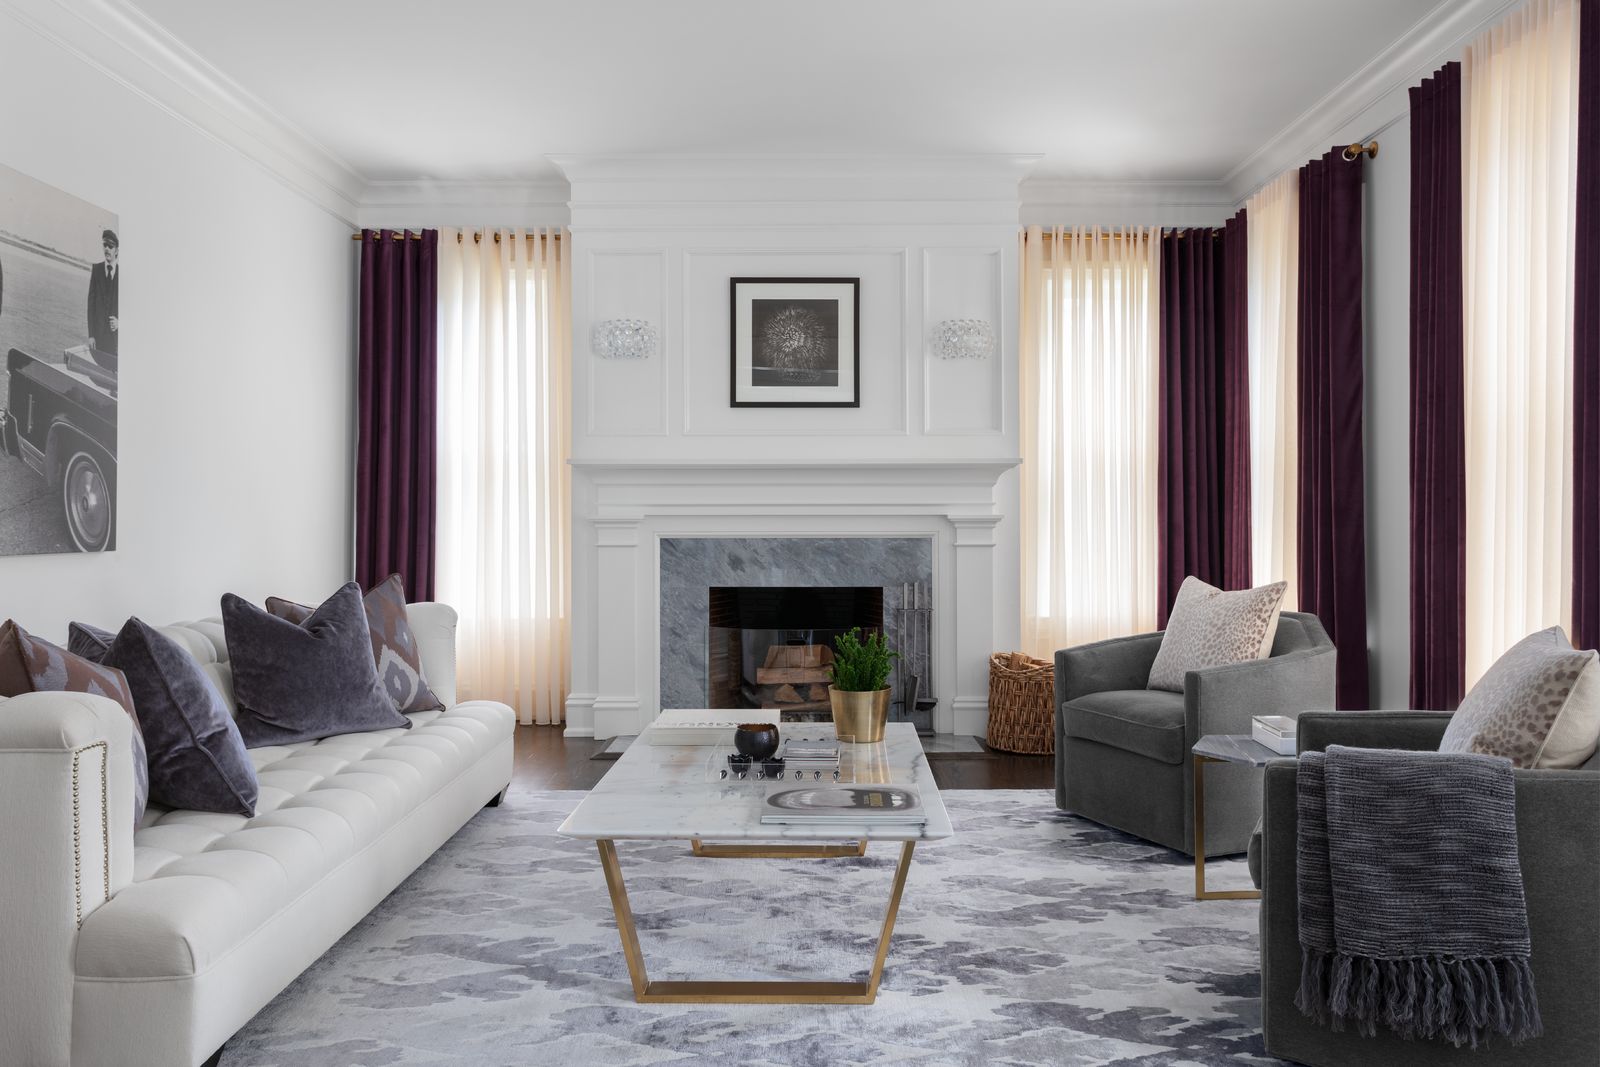 Purple velvet drapes share a rod with cream sheers on four large windows in a modern living room.